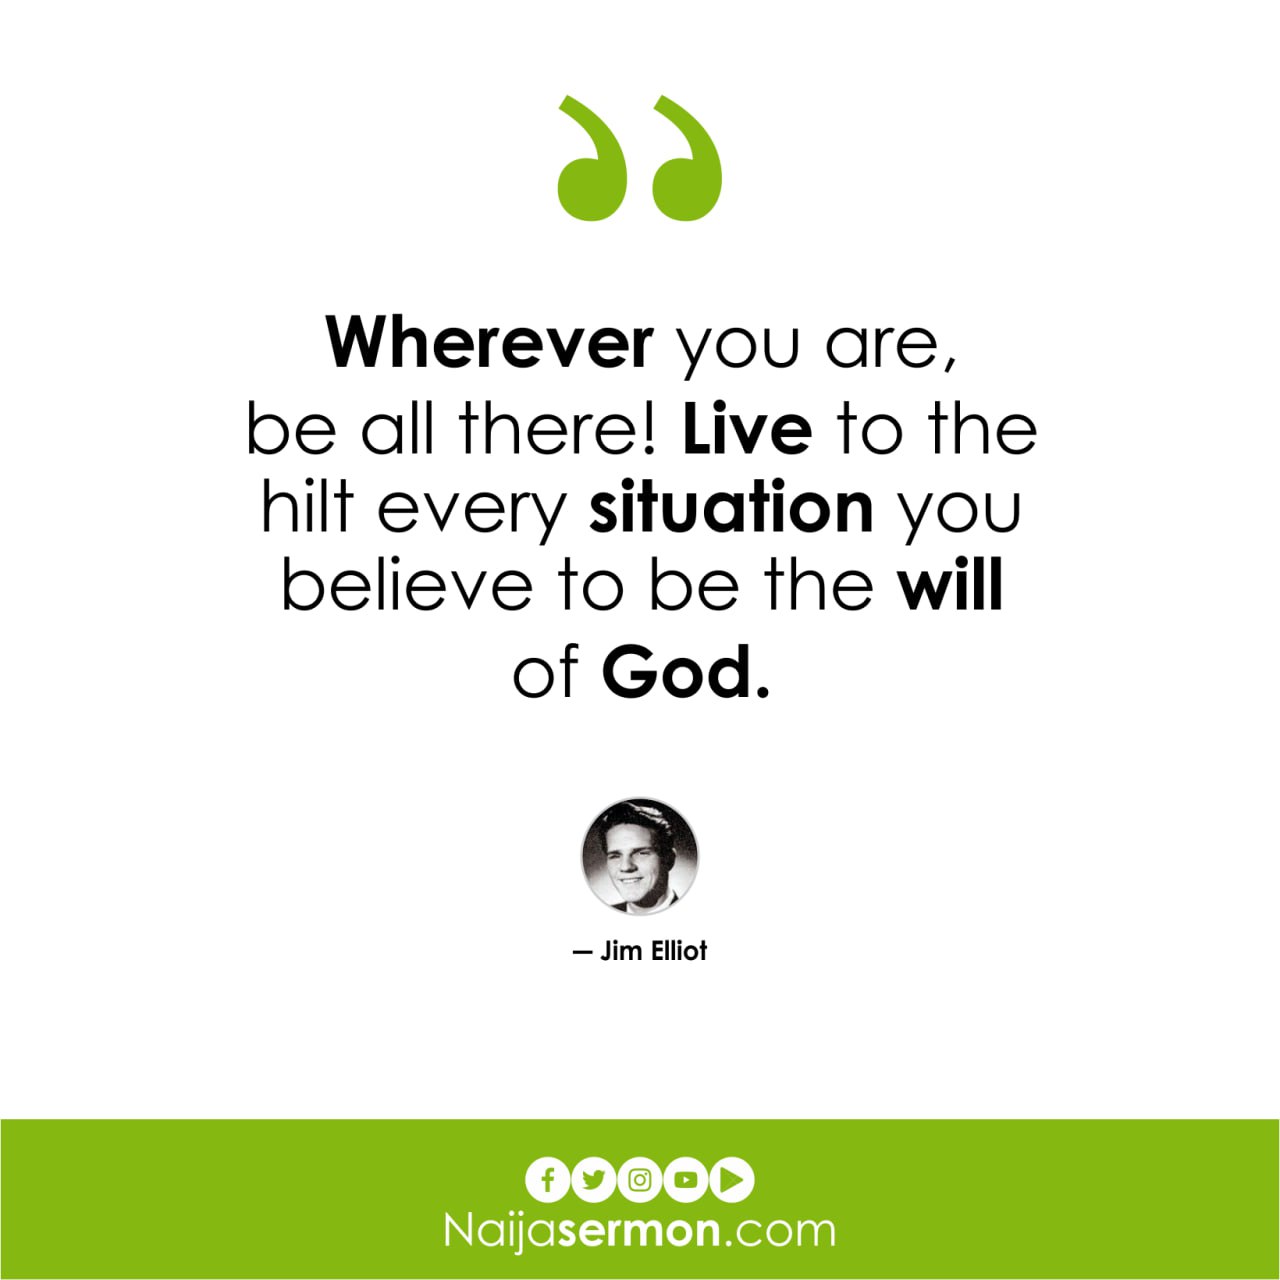 QUOTE OF THE DAY BY JIM ELLIOT 16